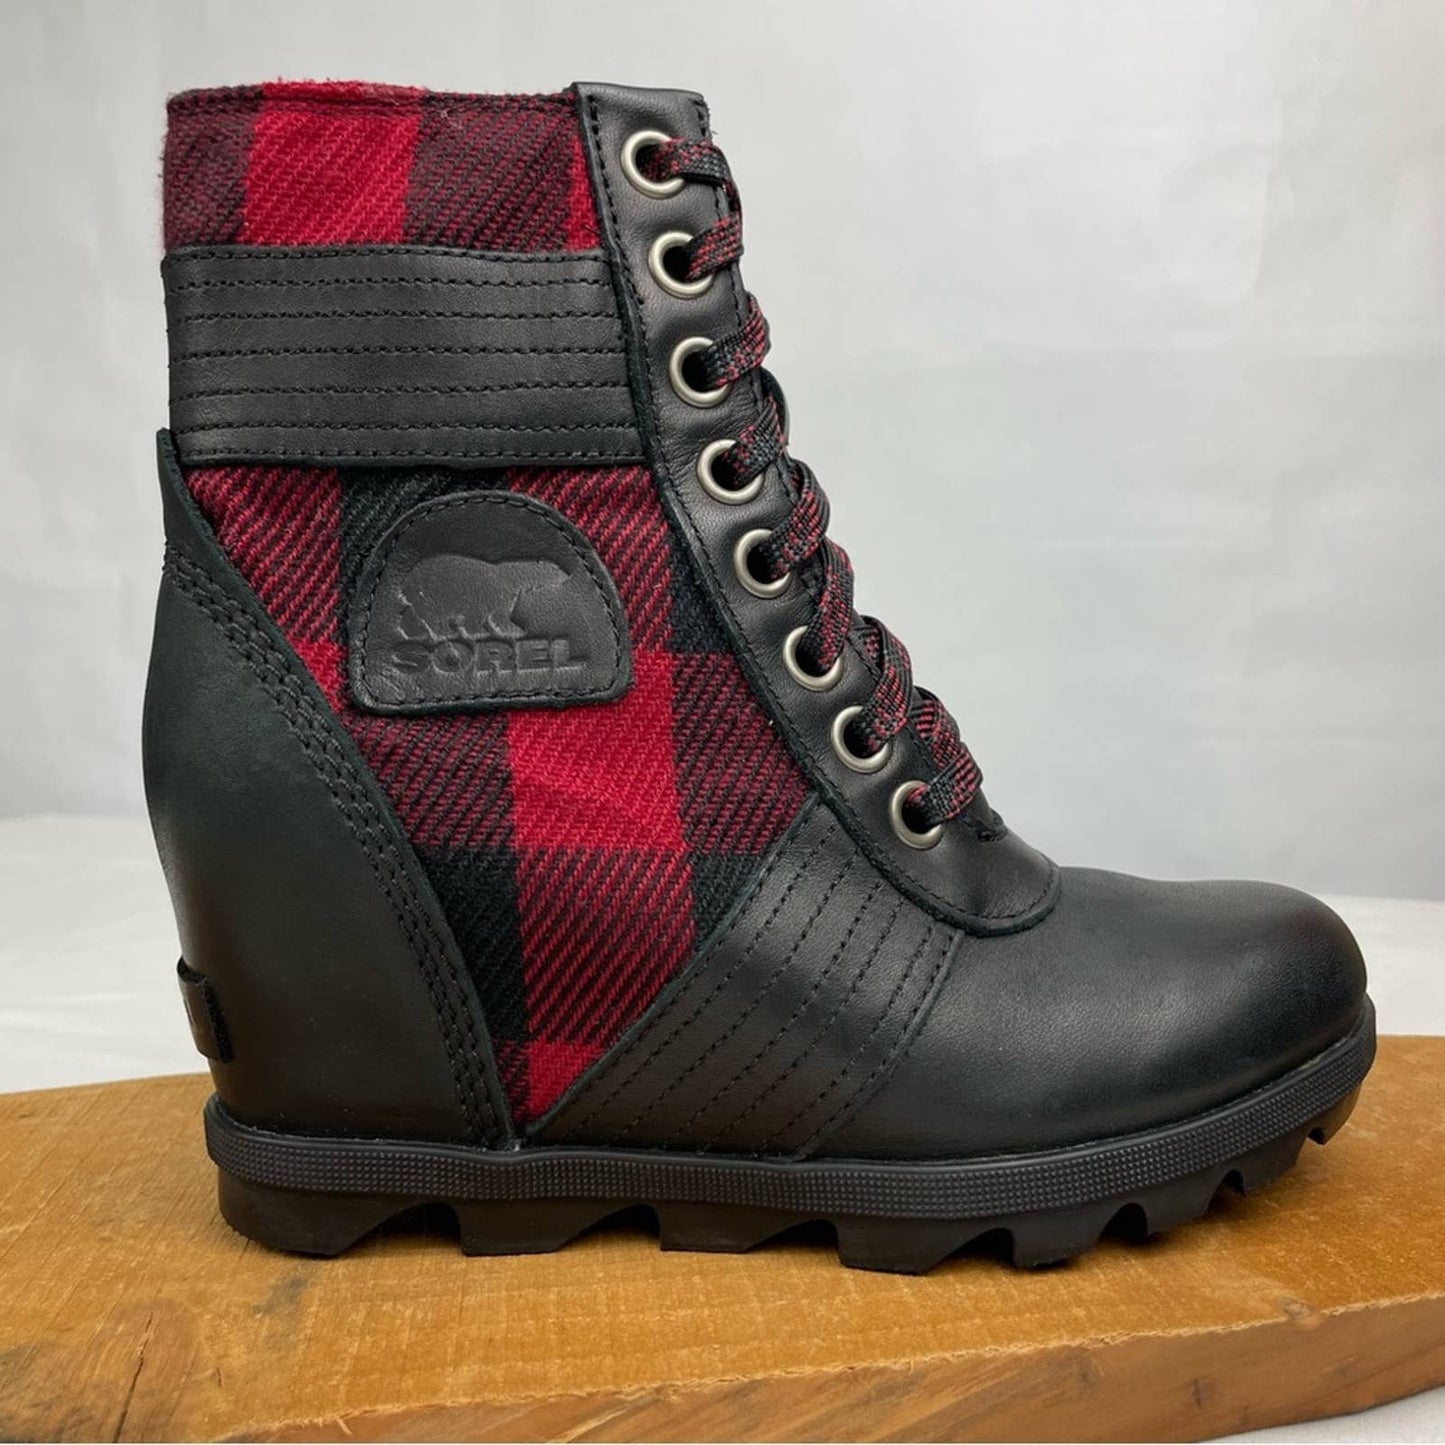 Sorel Lexie Wedge Ankle Bootie Red Black Buffalo Plaid Check Leather Trim Size 6